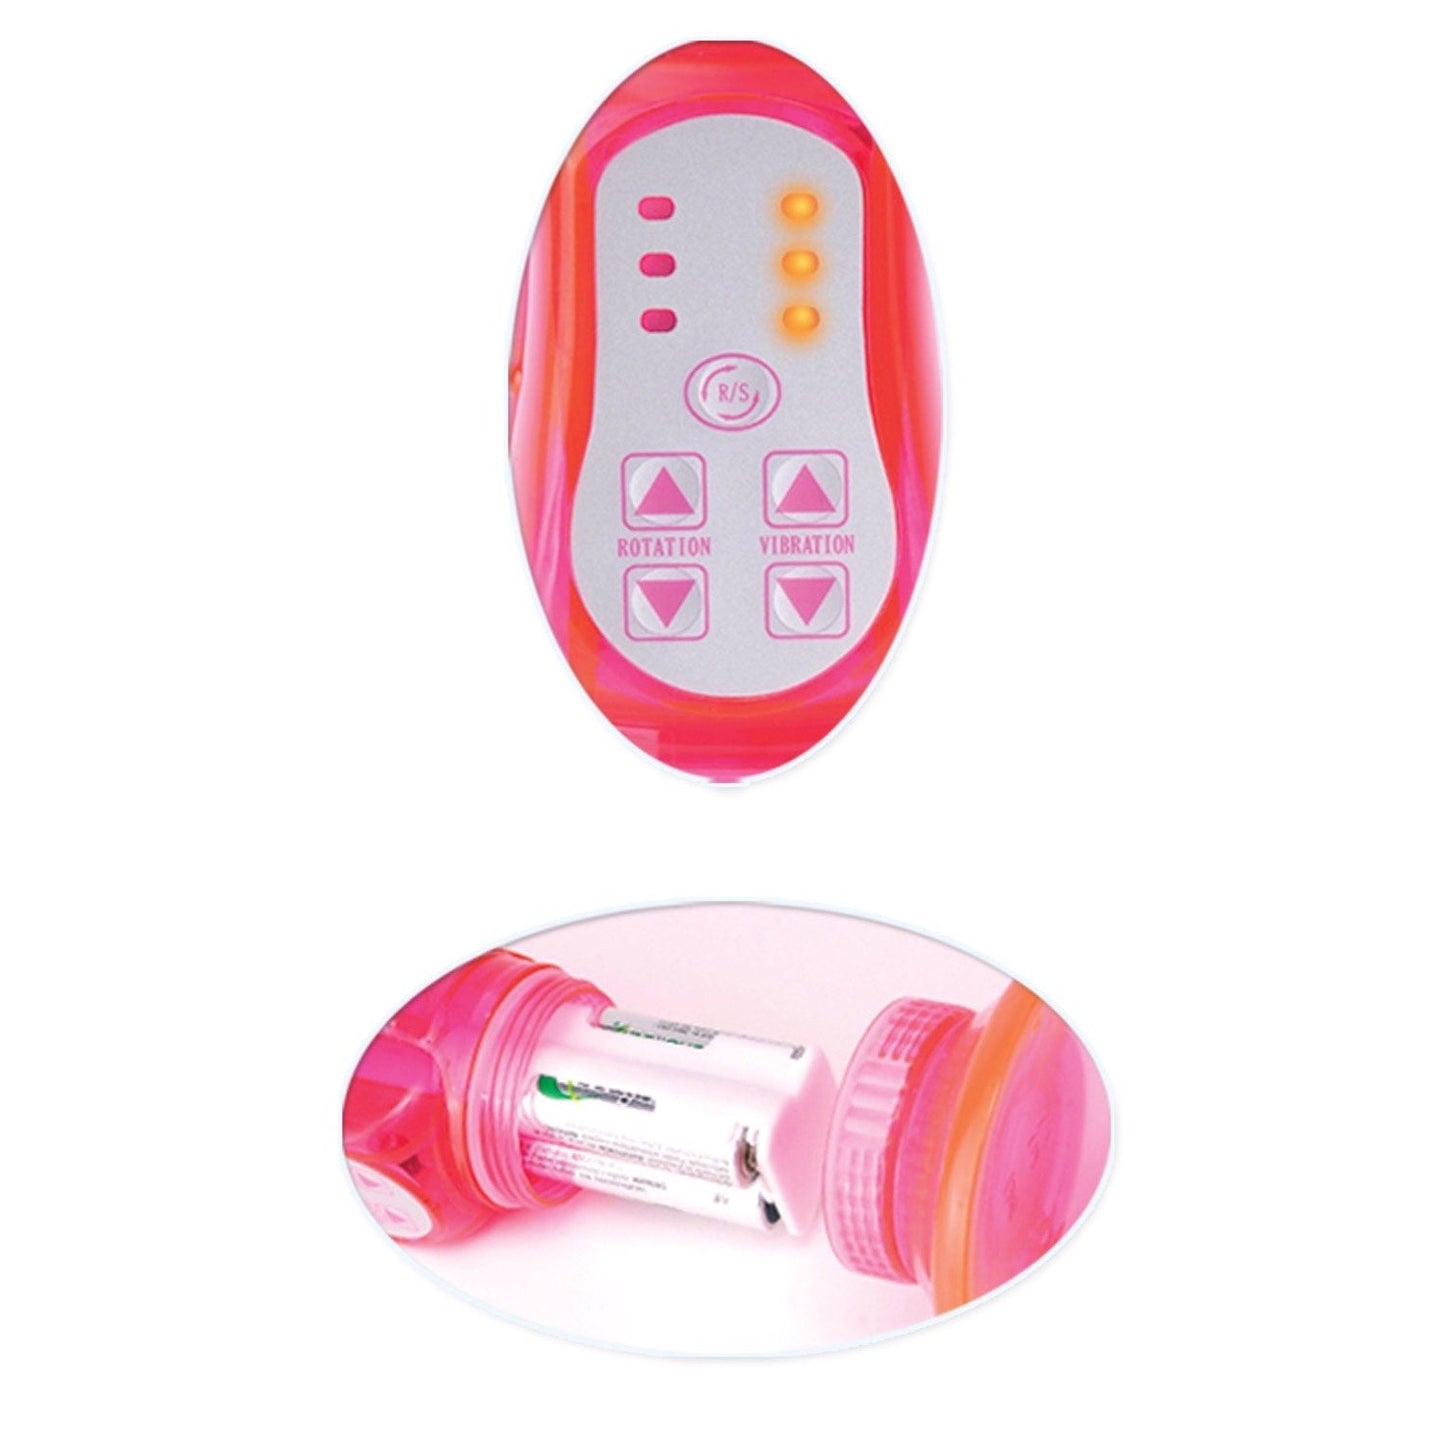 Deluxe Rotating Wall Bangers - Pink 7" Pearl Vibrator with Rabbit Clit Stimulator